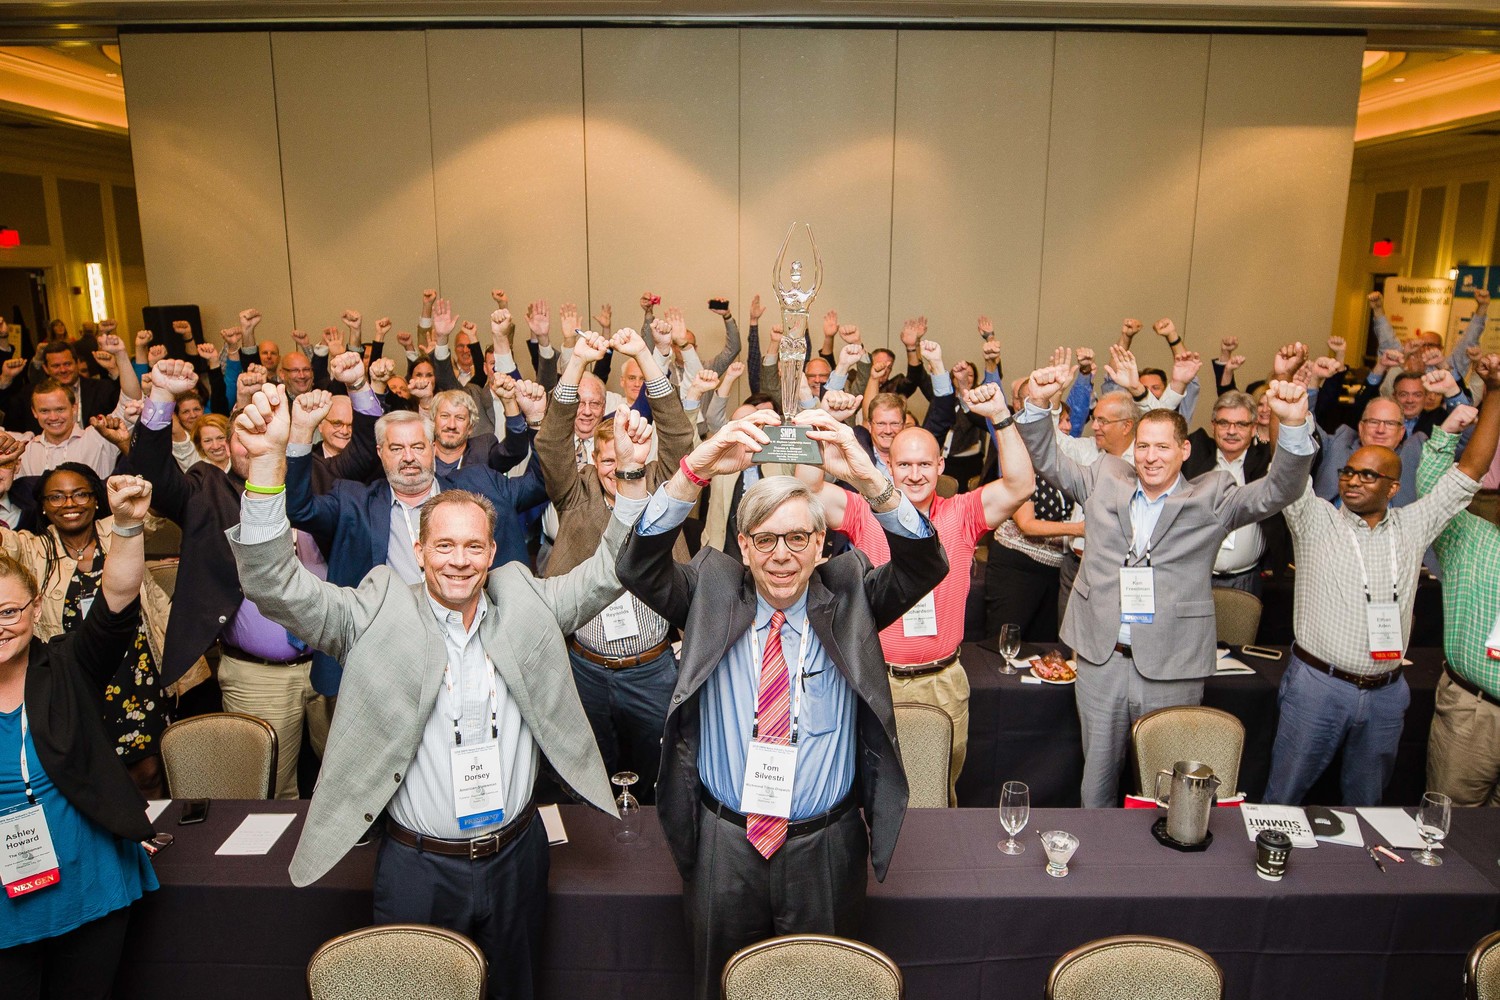 Reaching for the stars:  SNPA members raise their arms with Mayborn Award recipient Tom Silvestri in salute and celebration of our industry.